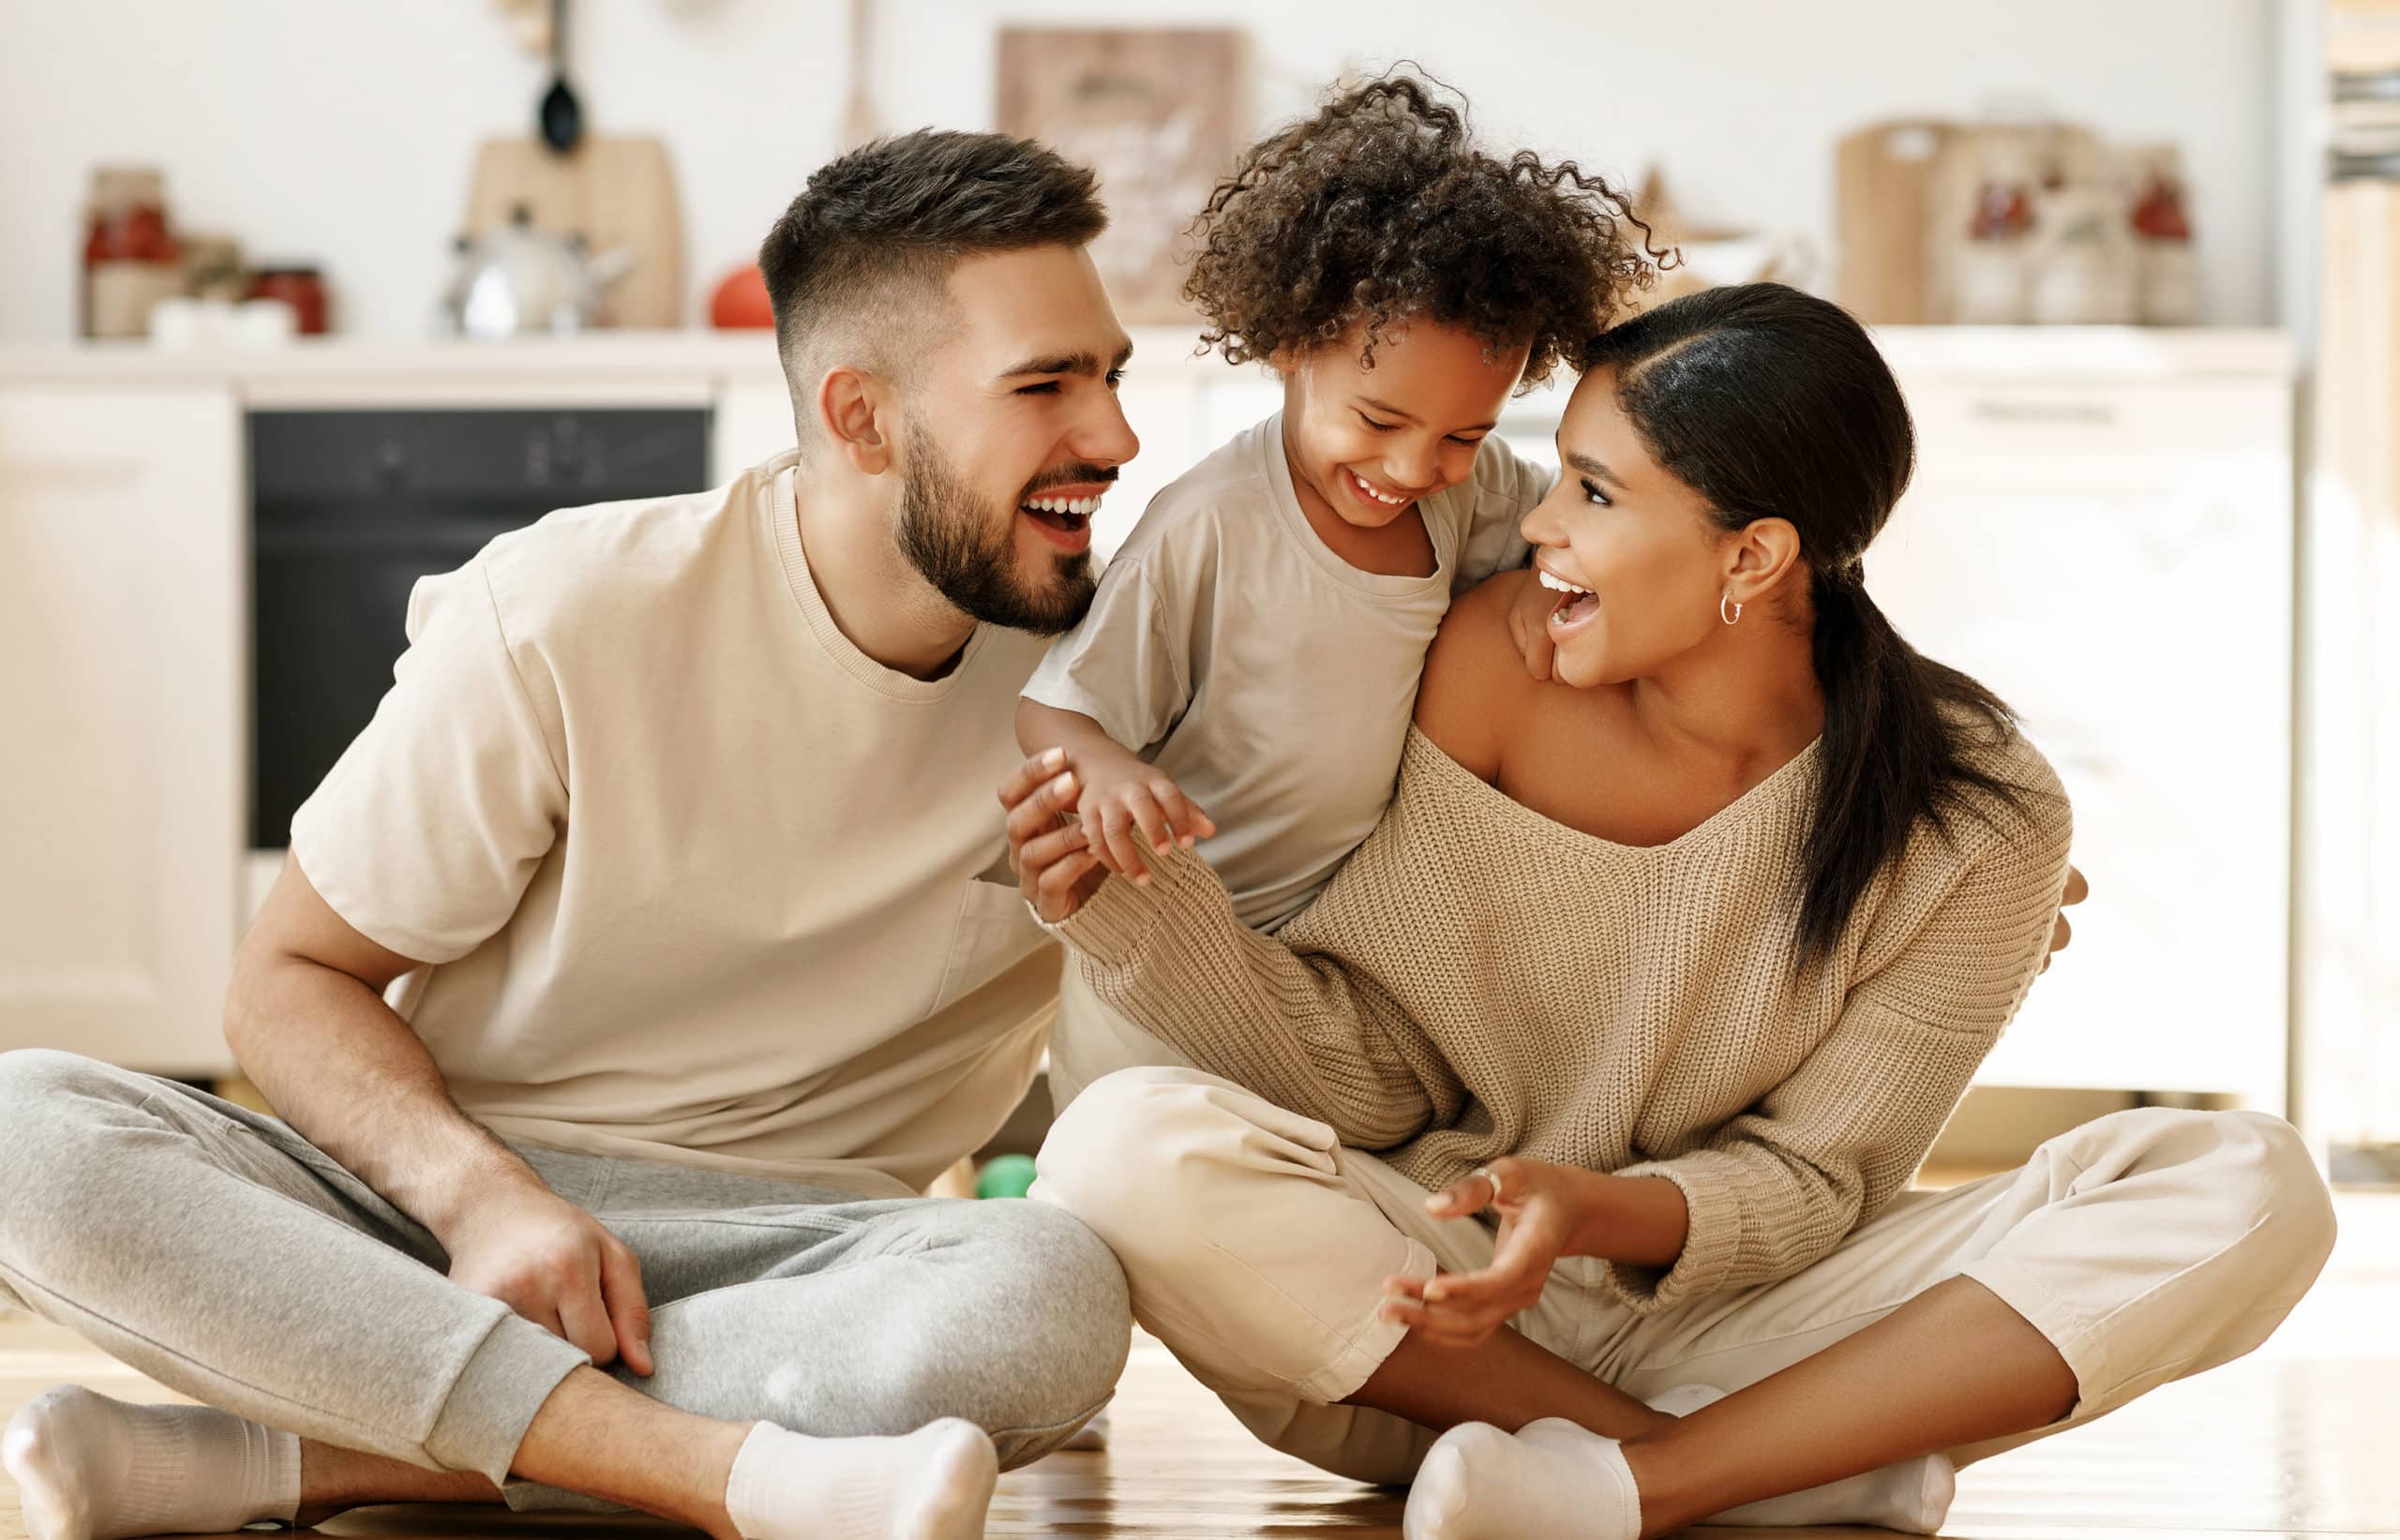 Parents and a child smiling and spending time together during the holiday season